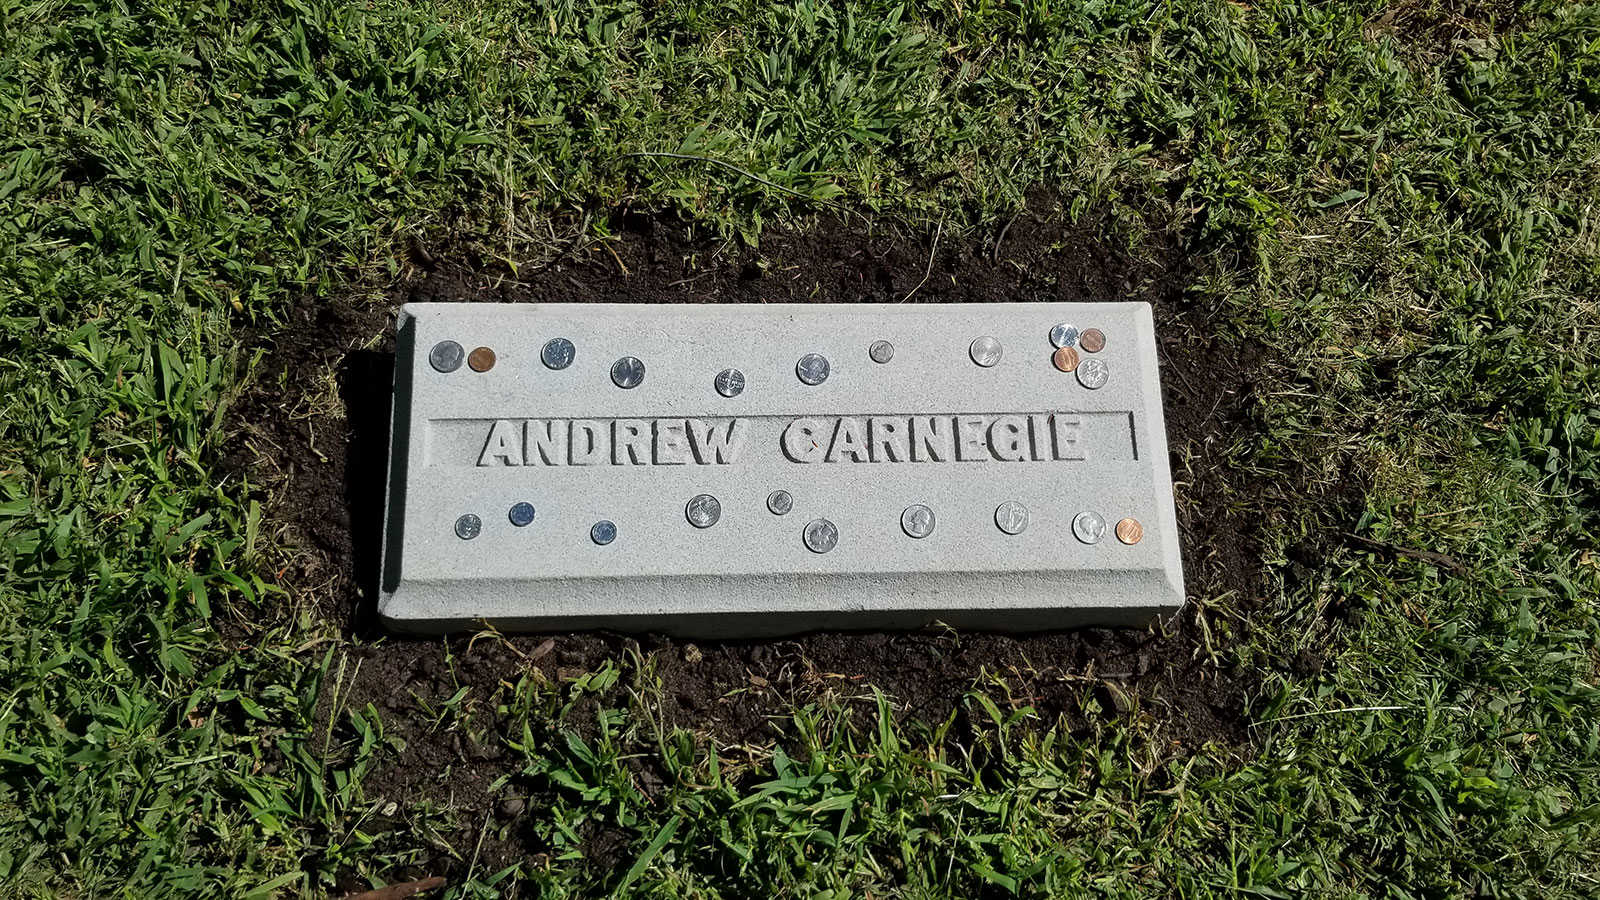 The centennial of Andrew Carnegie’s passing was commemorated by ceremonial wreath-layings on both sides of the Atlantic Ocean in the town of his birth and at Carnegie’s burial site.